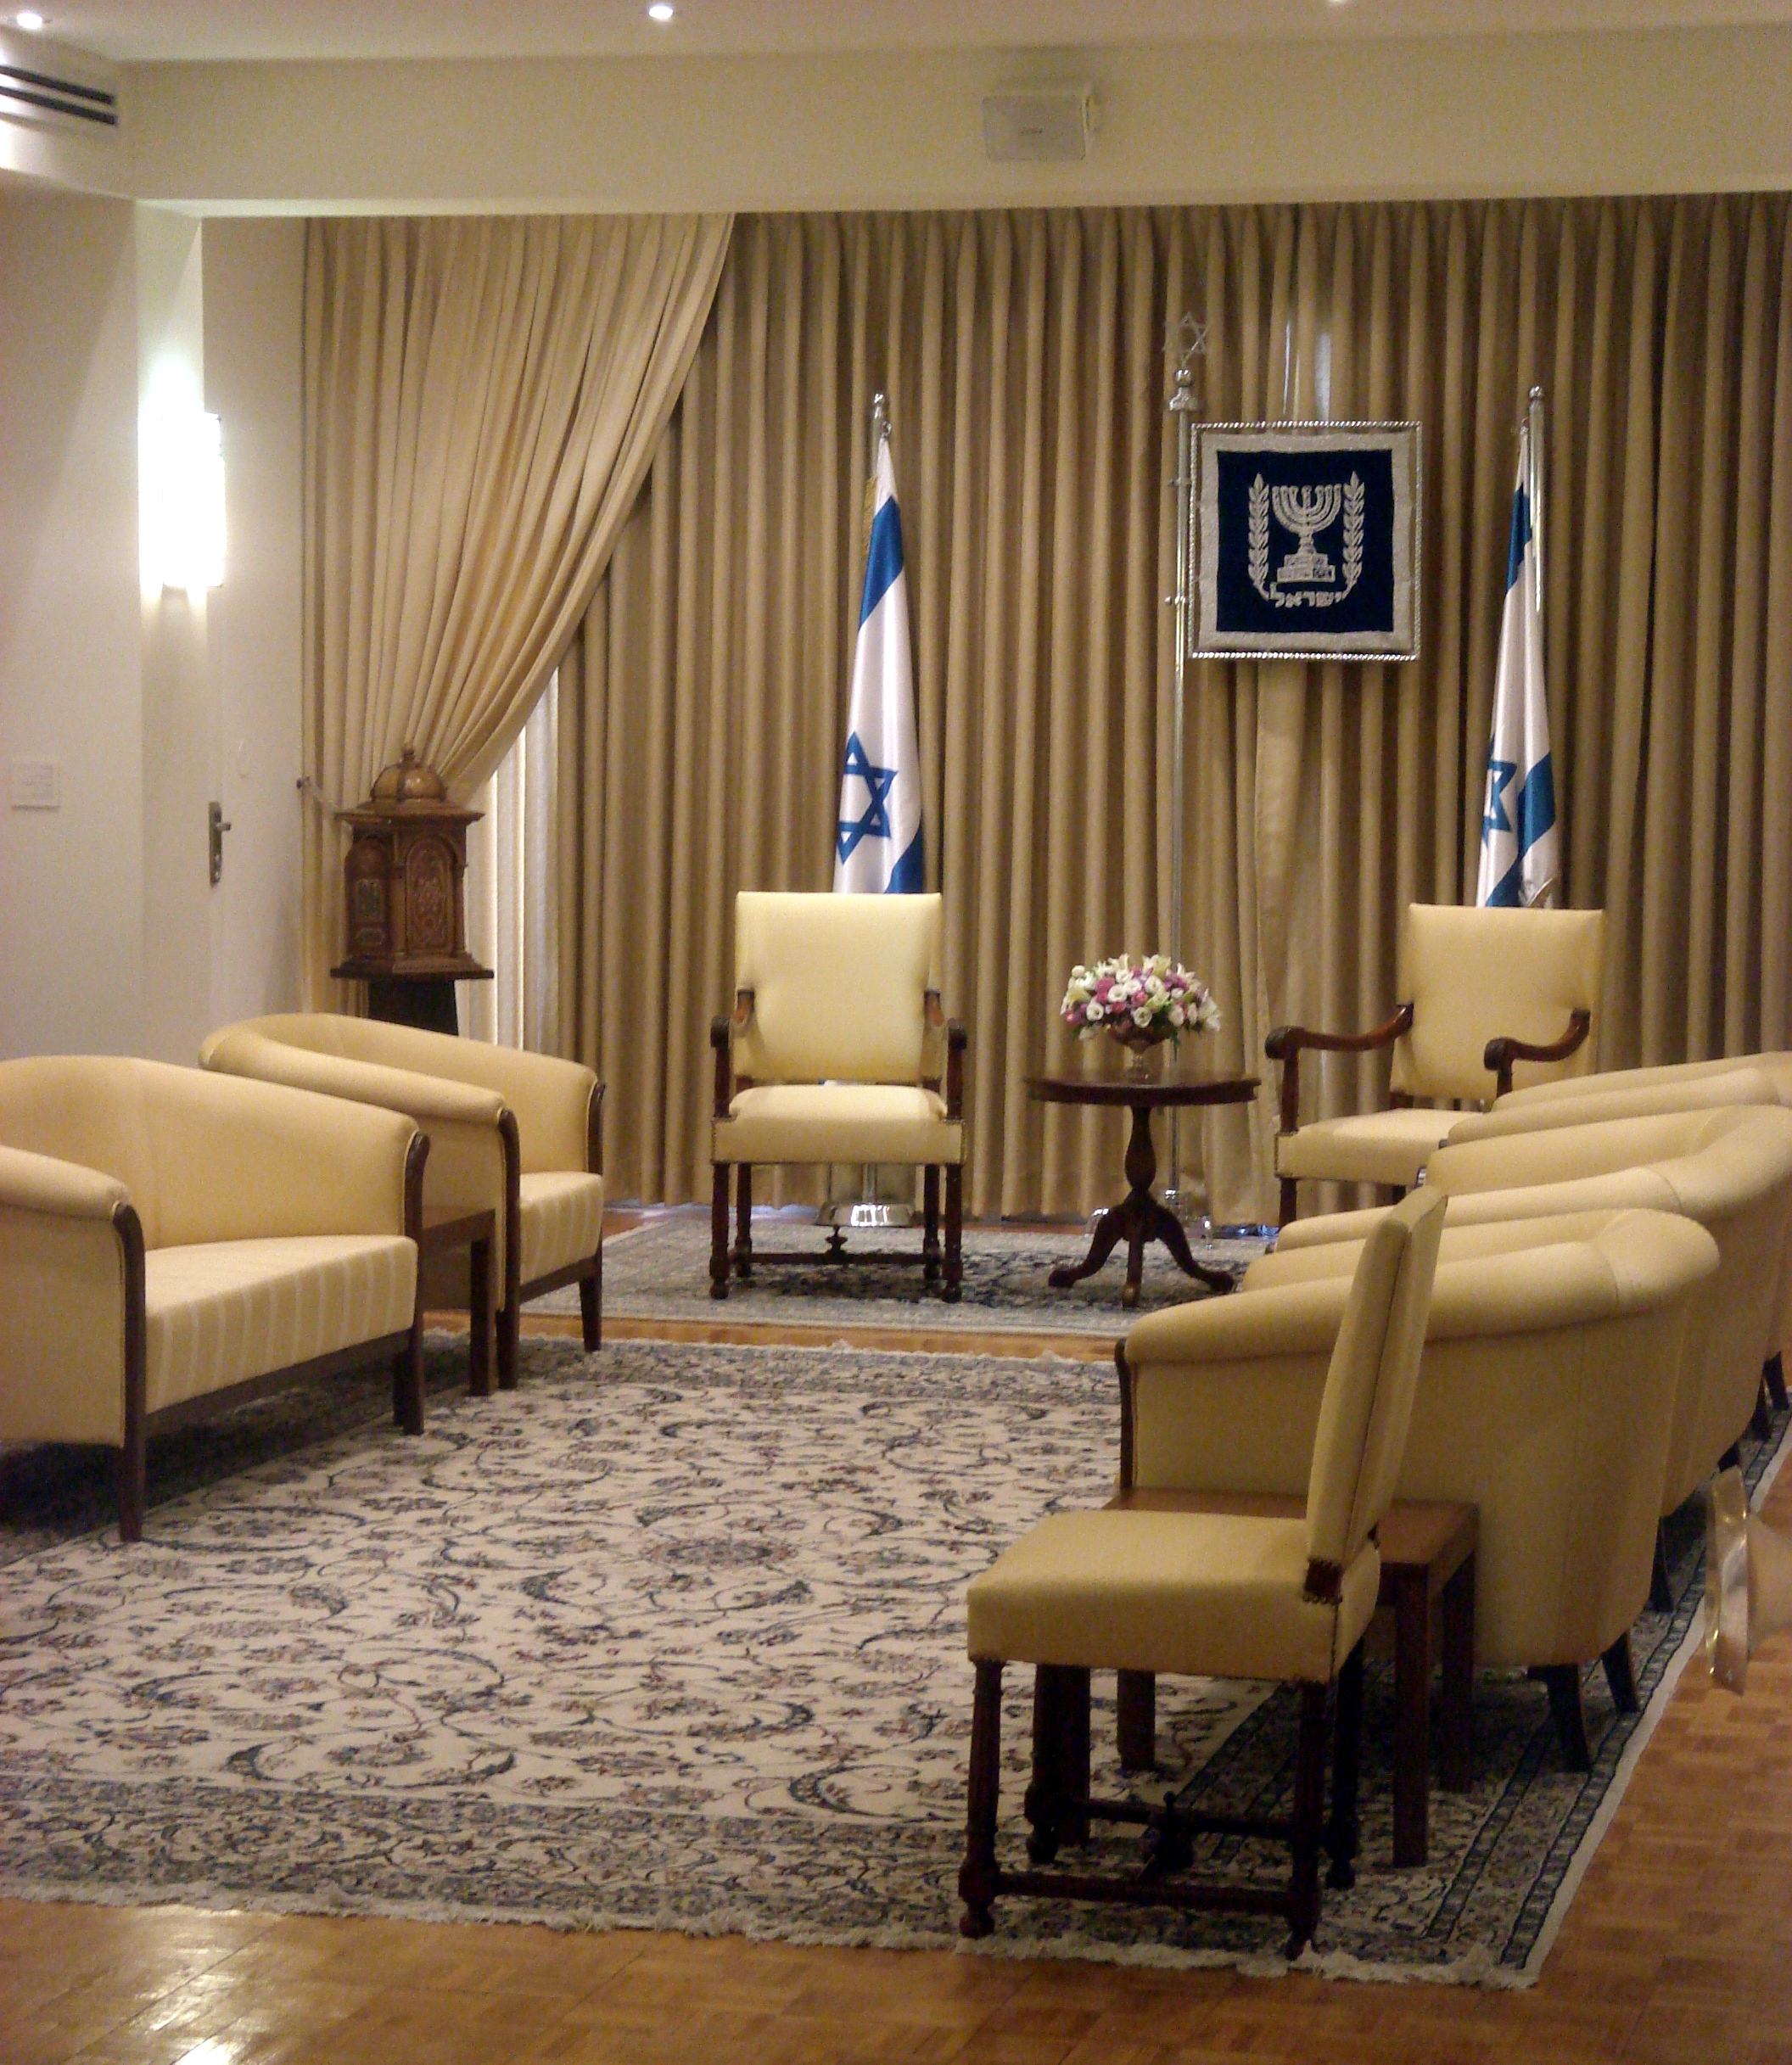 The_Meeting_Room_at_the_President_of_Israel_Residence